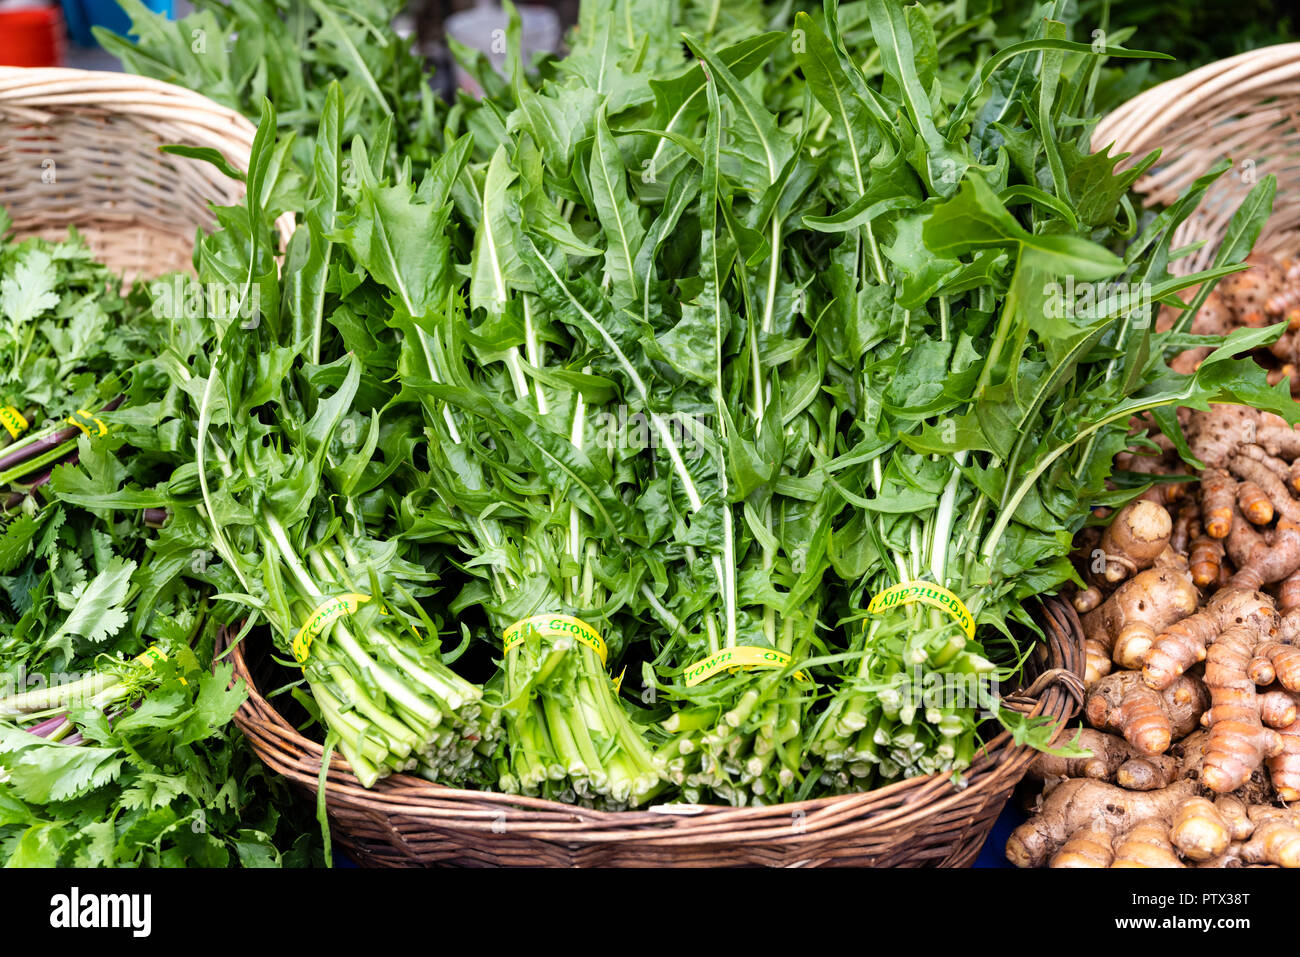 Dandelion Greens on display at the farmers market. Stock Photo